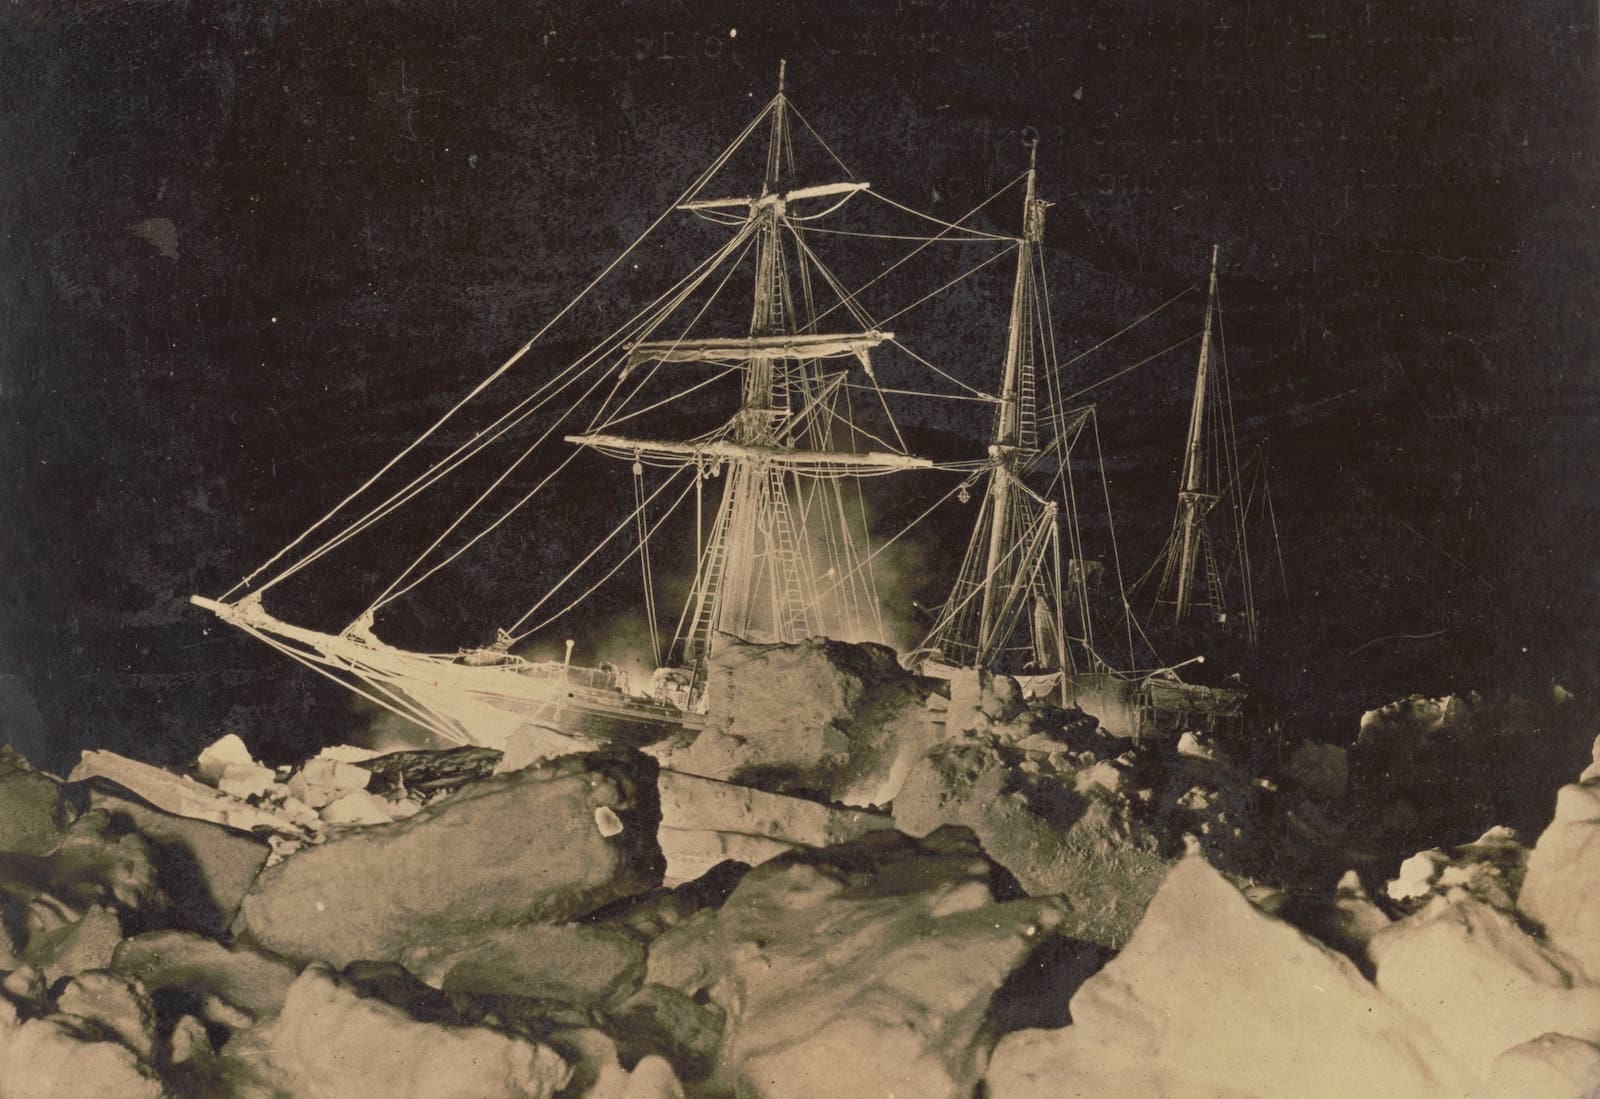 a black and white negative of a ship from an 1800s expedition stuck in antarctic ice